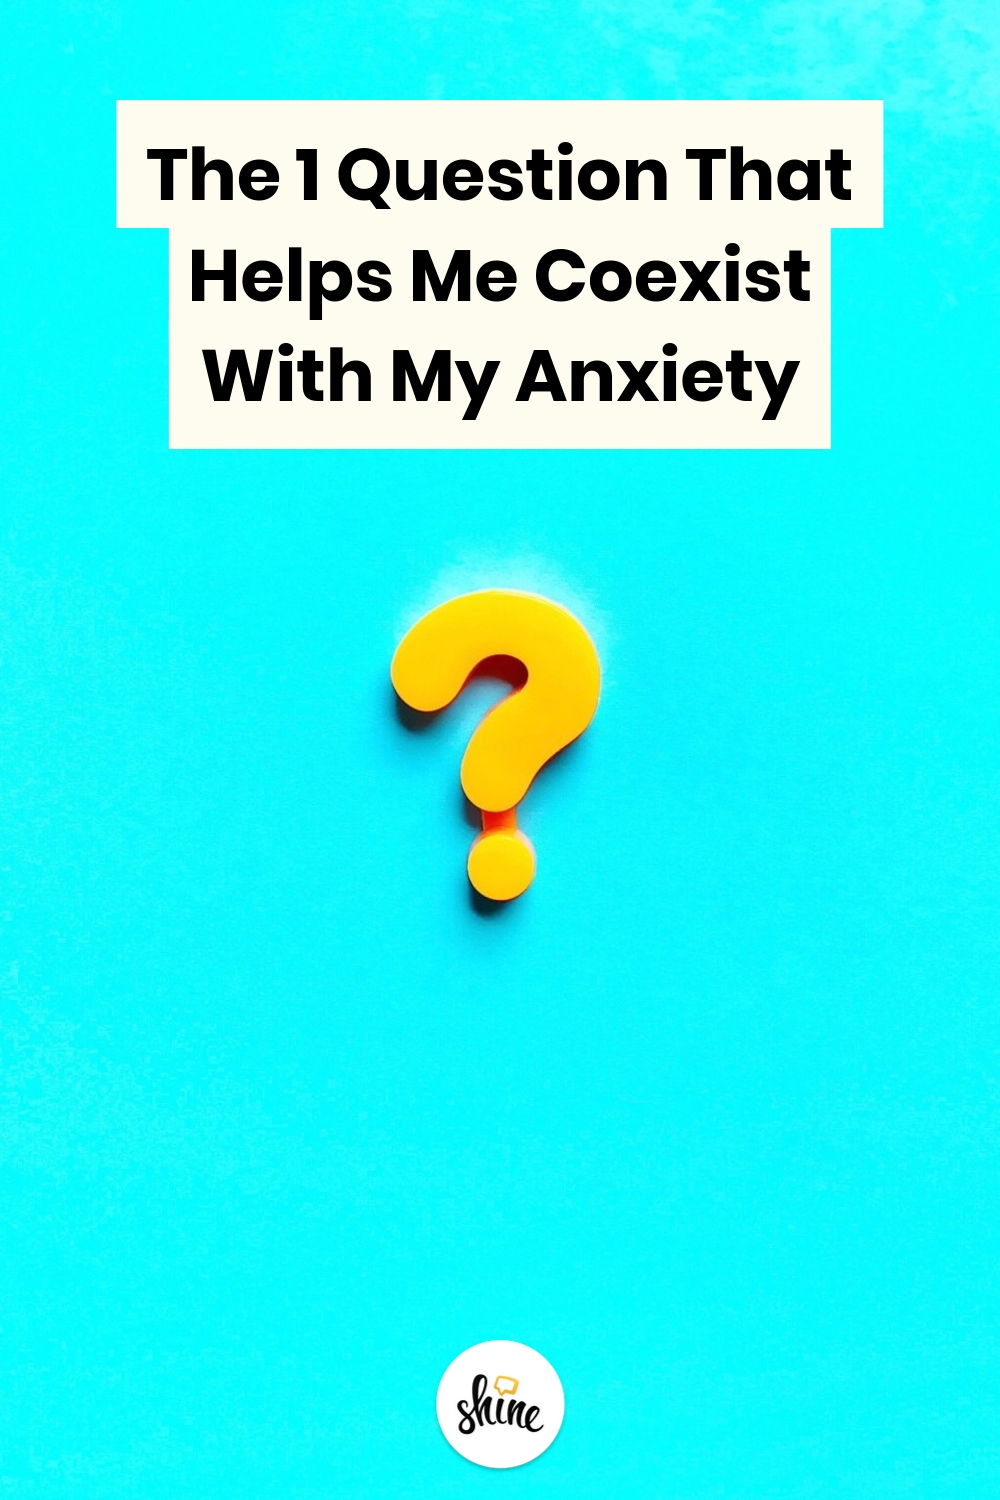 1 Question That Helps Me Coexist with Anxiety